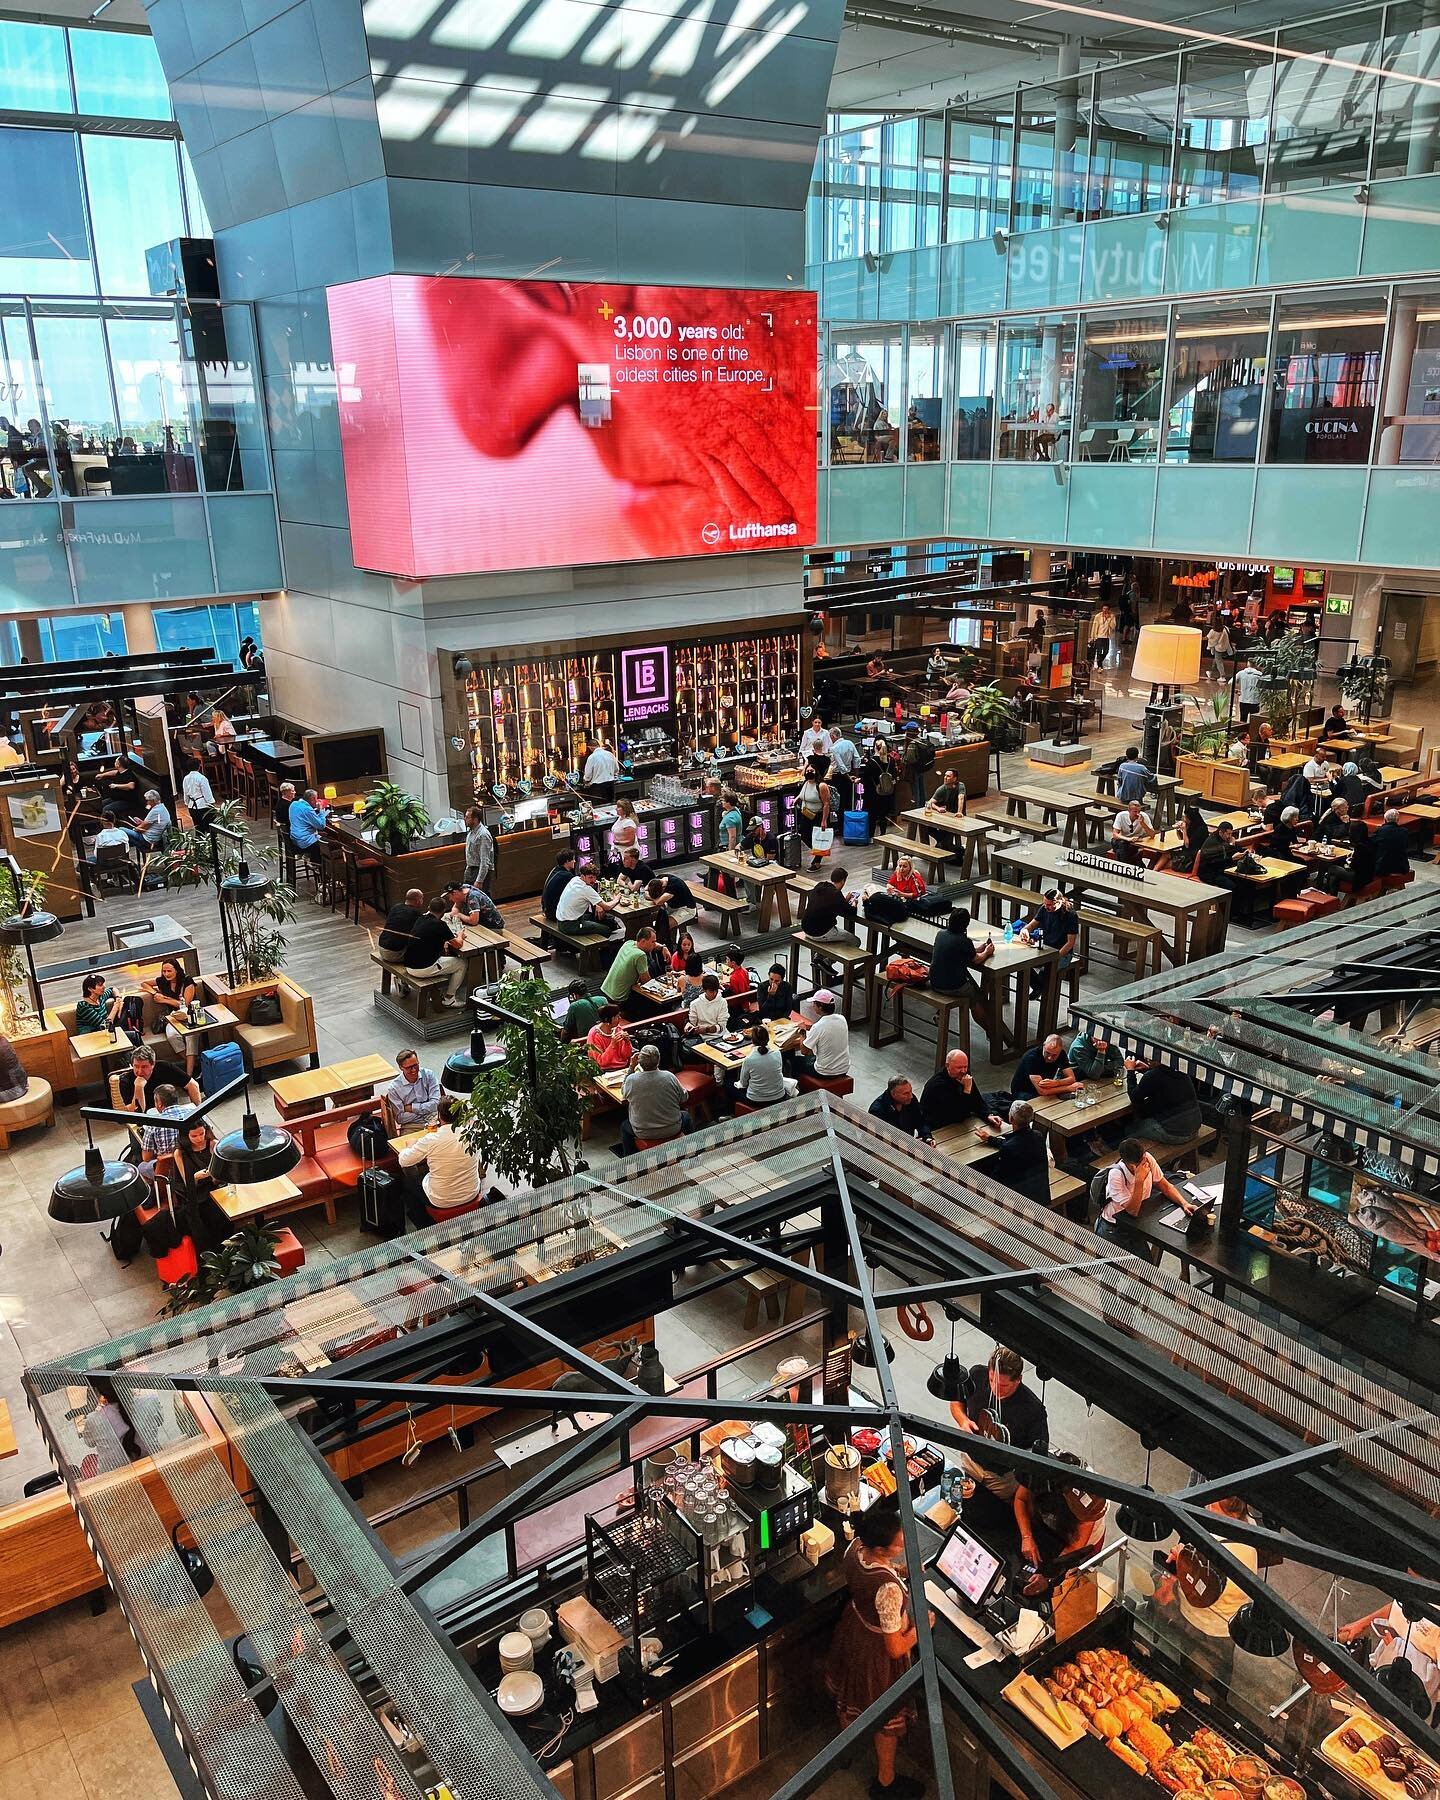 #airports ~ Though I&rsquo;m not a big fan of long layovers, if there must be one, I don&rsquo;t mind it taking place @munich_airport ✈️
Smaller in scale, a chill vibe, and delightful cafes, which are great places to write ✍🏼 

#airportarchitectures